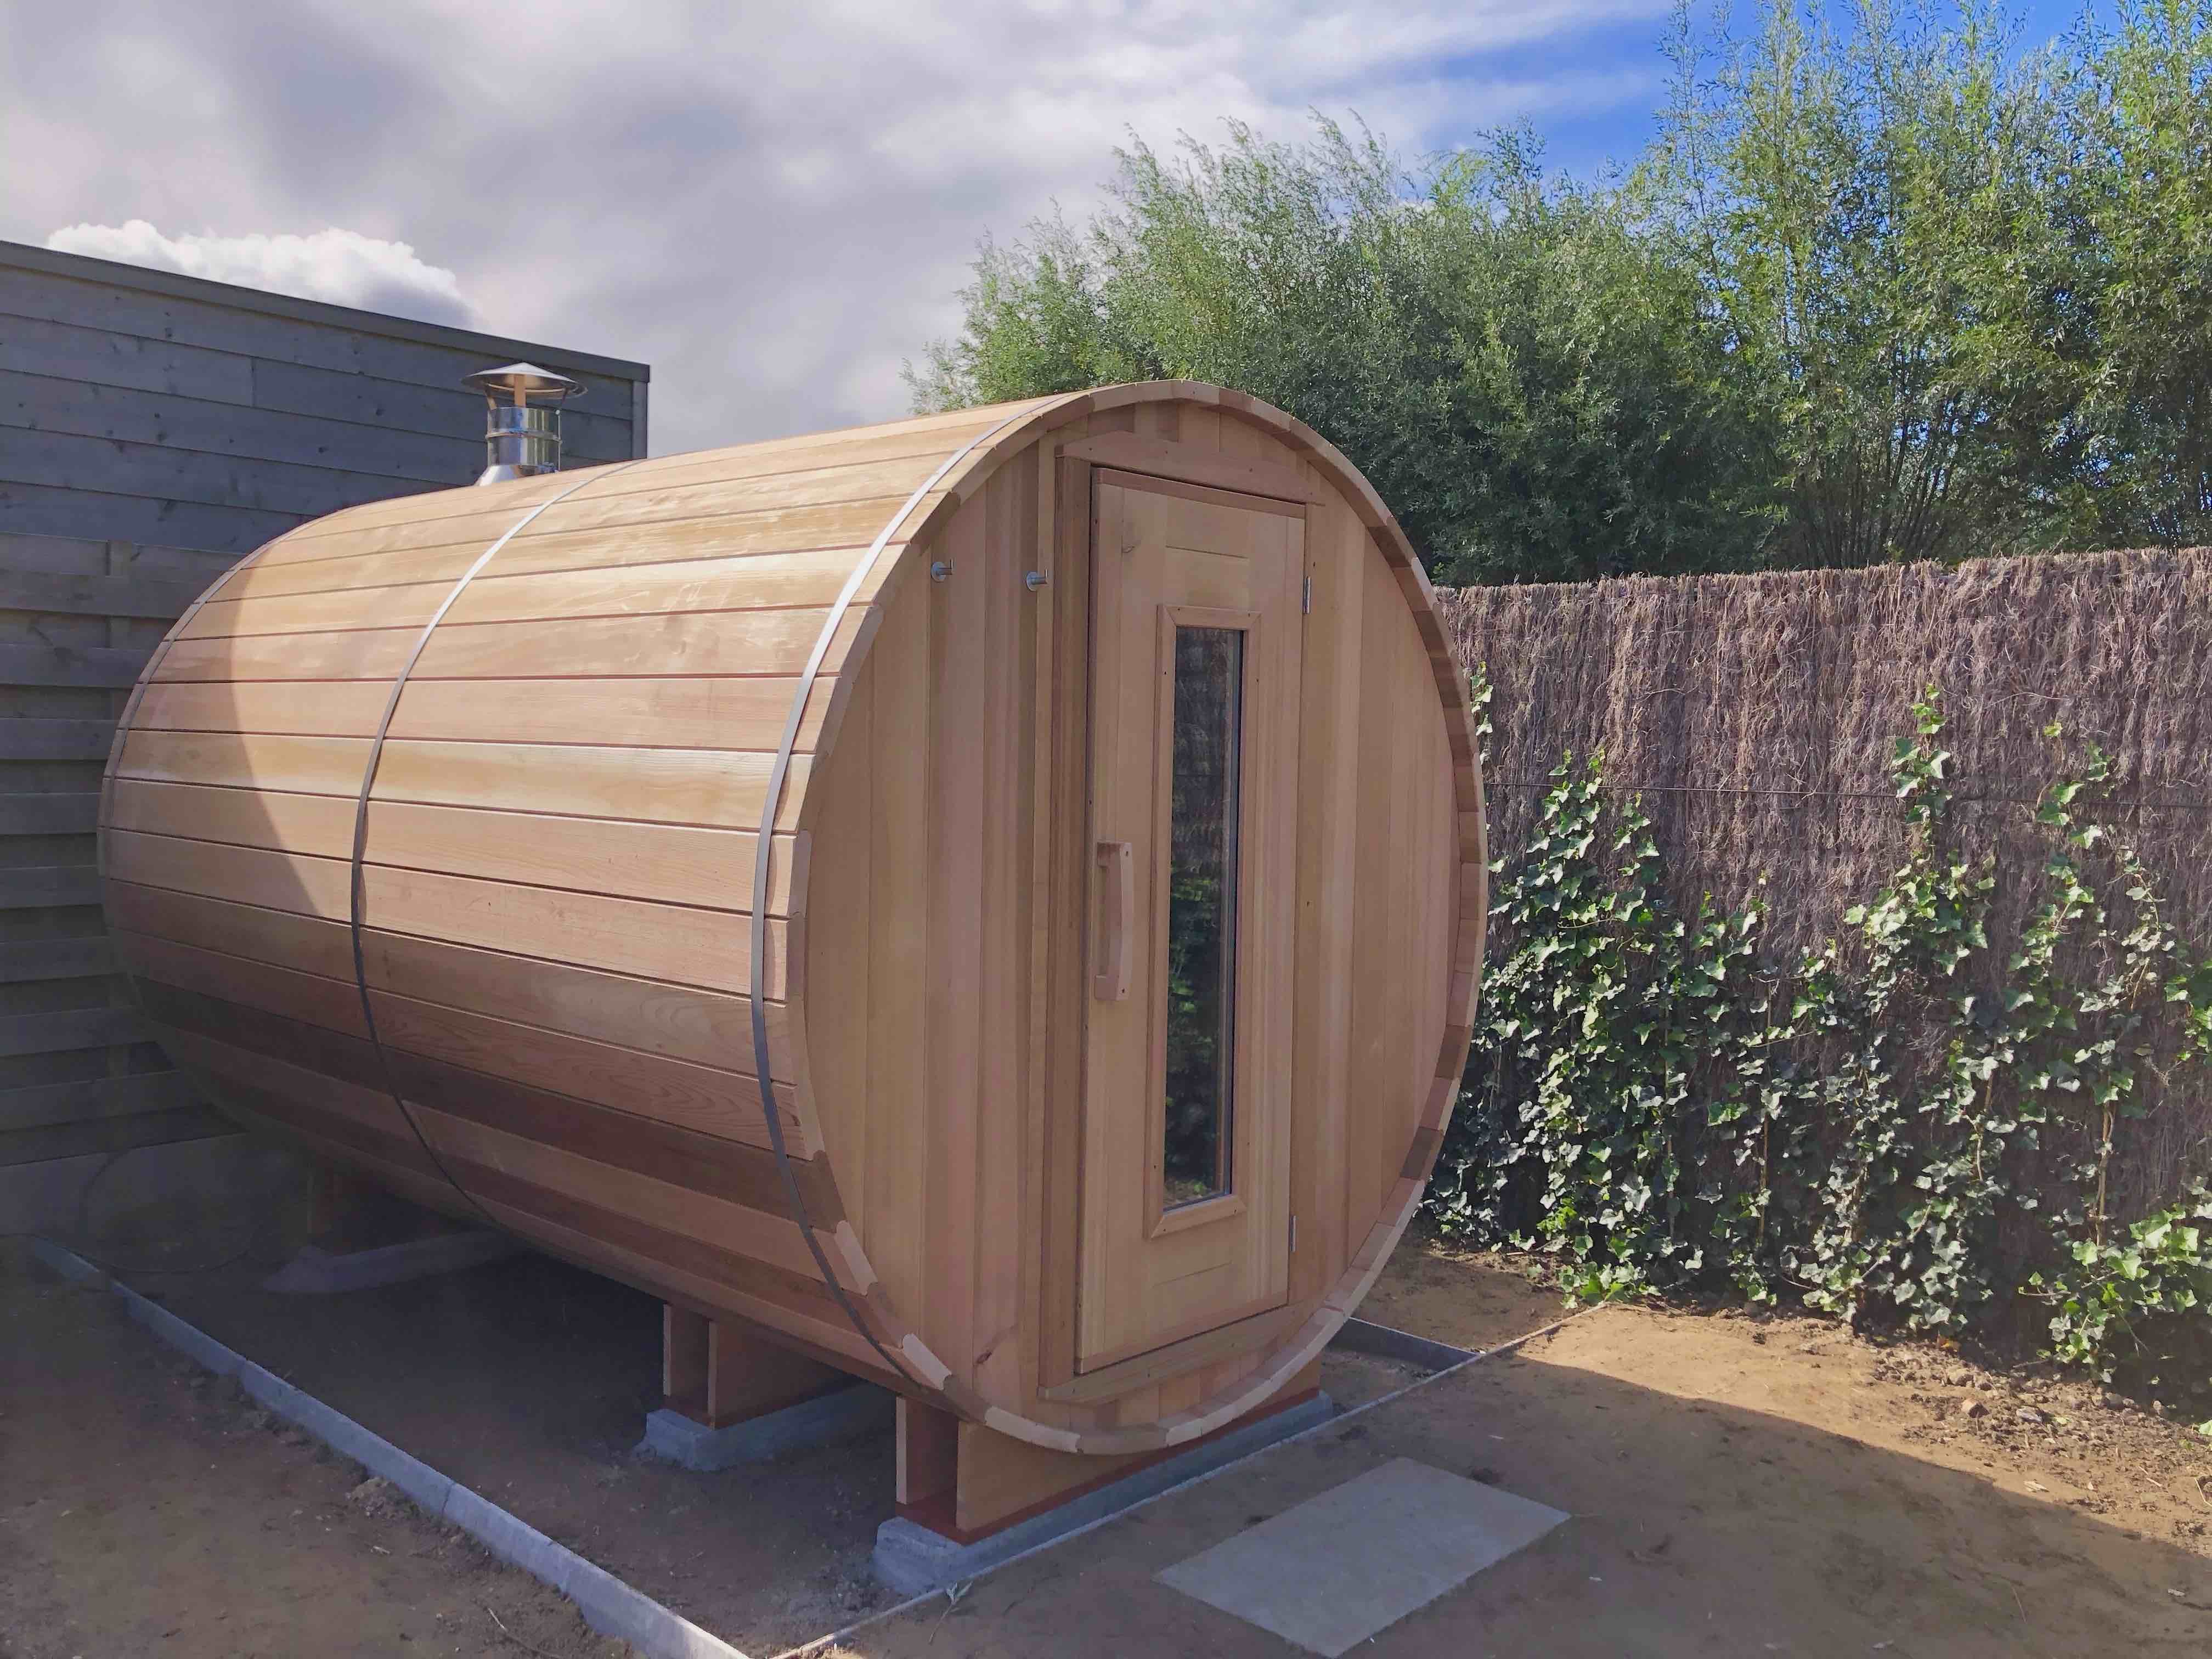 Wood-fired sauna barrel with longer interior space in Roeselare